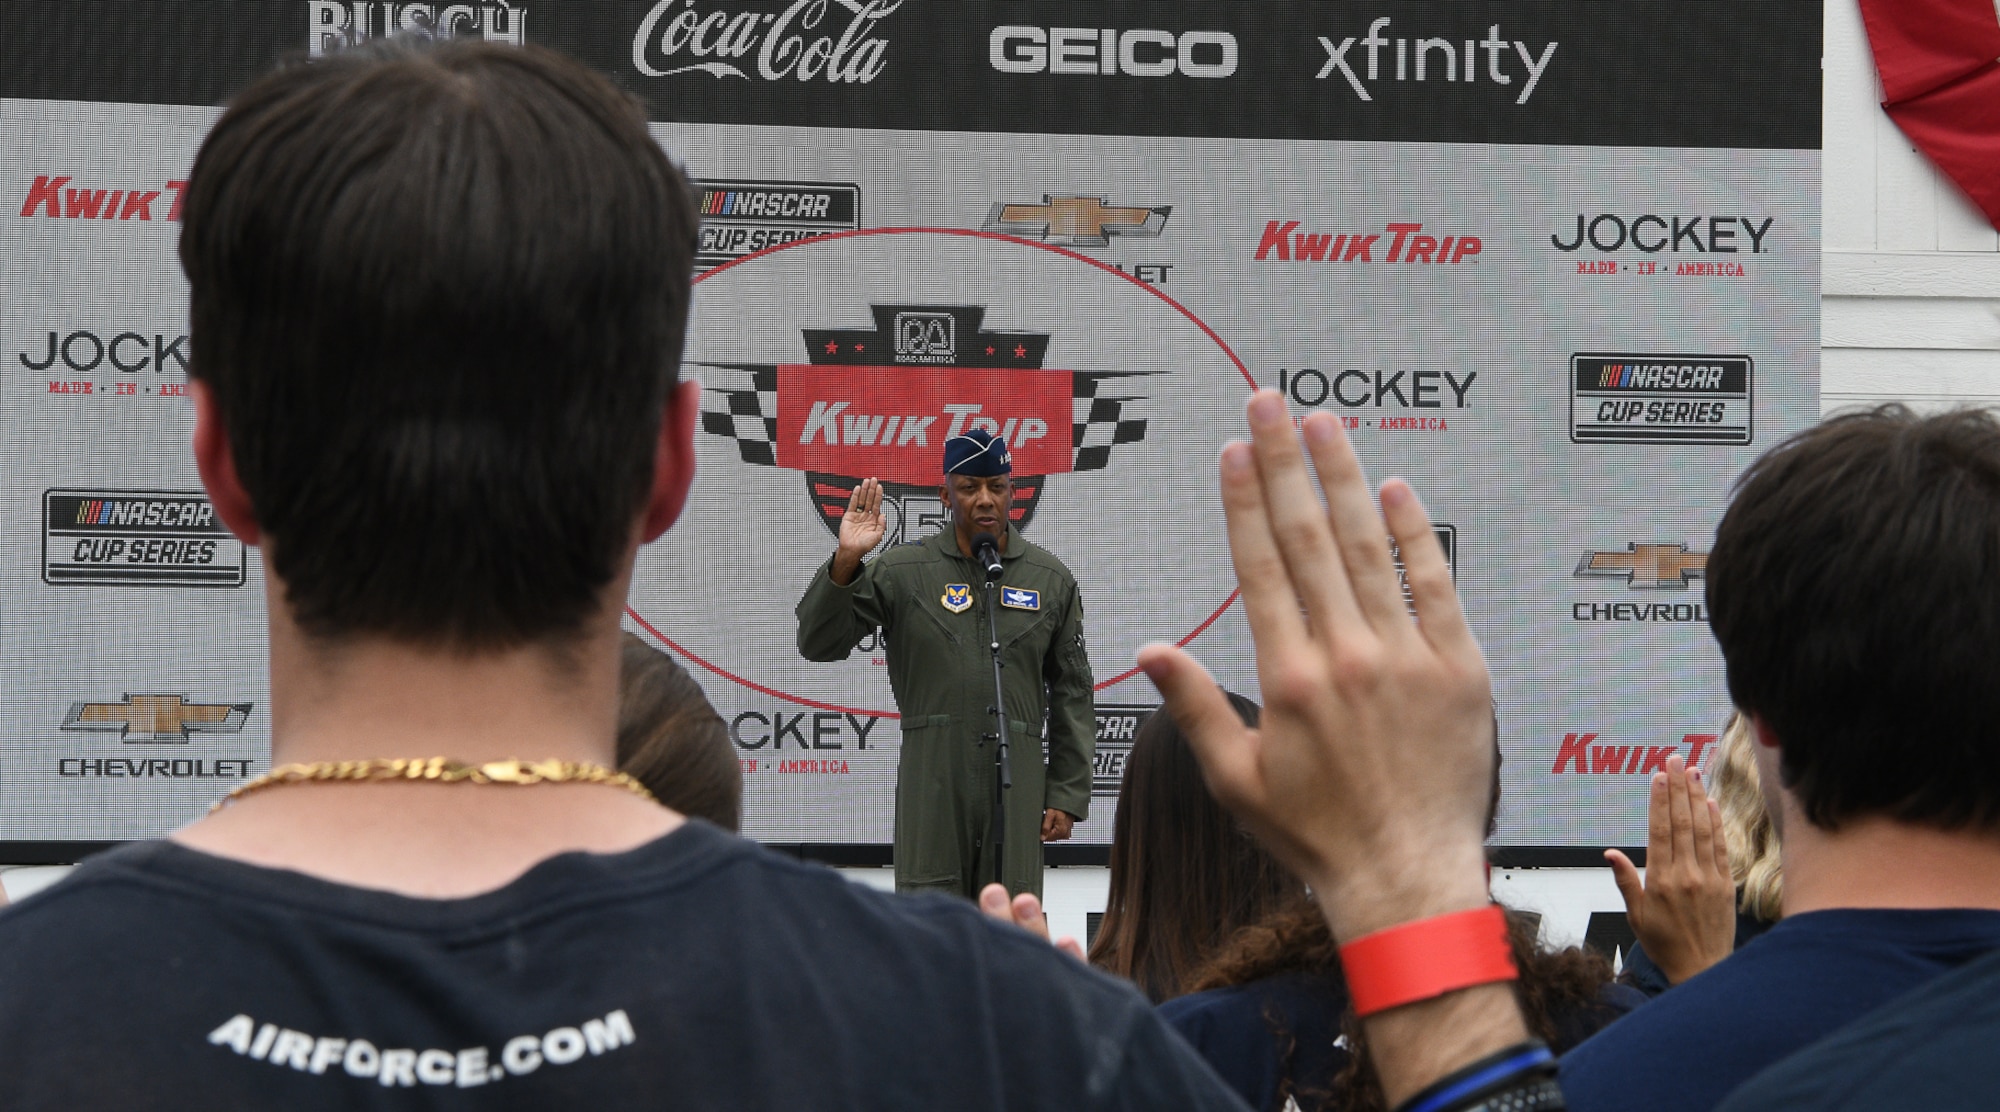 Air Force Chief of Staff Gen. CQ Brown, Jr. administers the Oath of Enlistment for 23 future Airmen, at Victory Lane inside the Road America race course, near Elkhart Lake, Wisconsin, July 3, 2022.